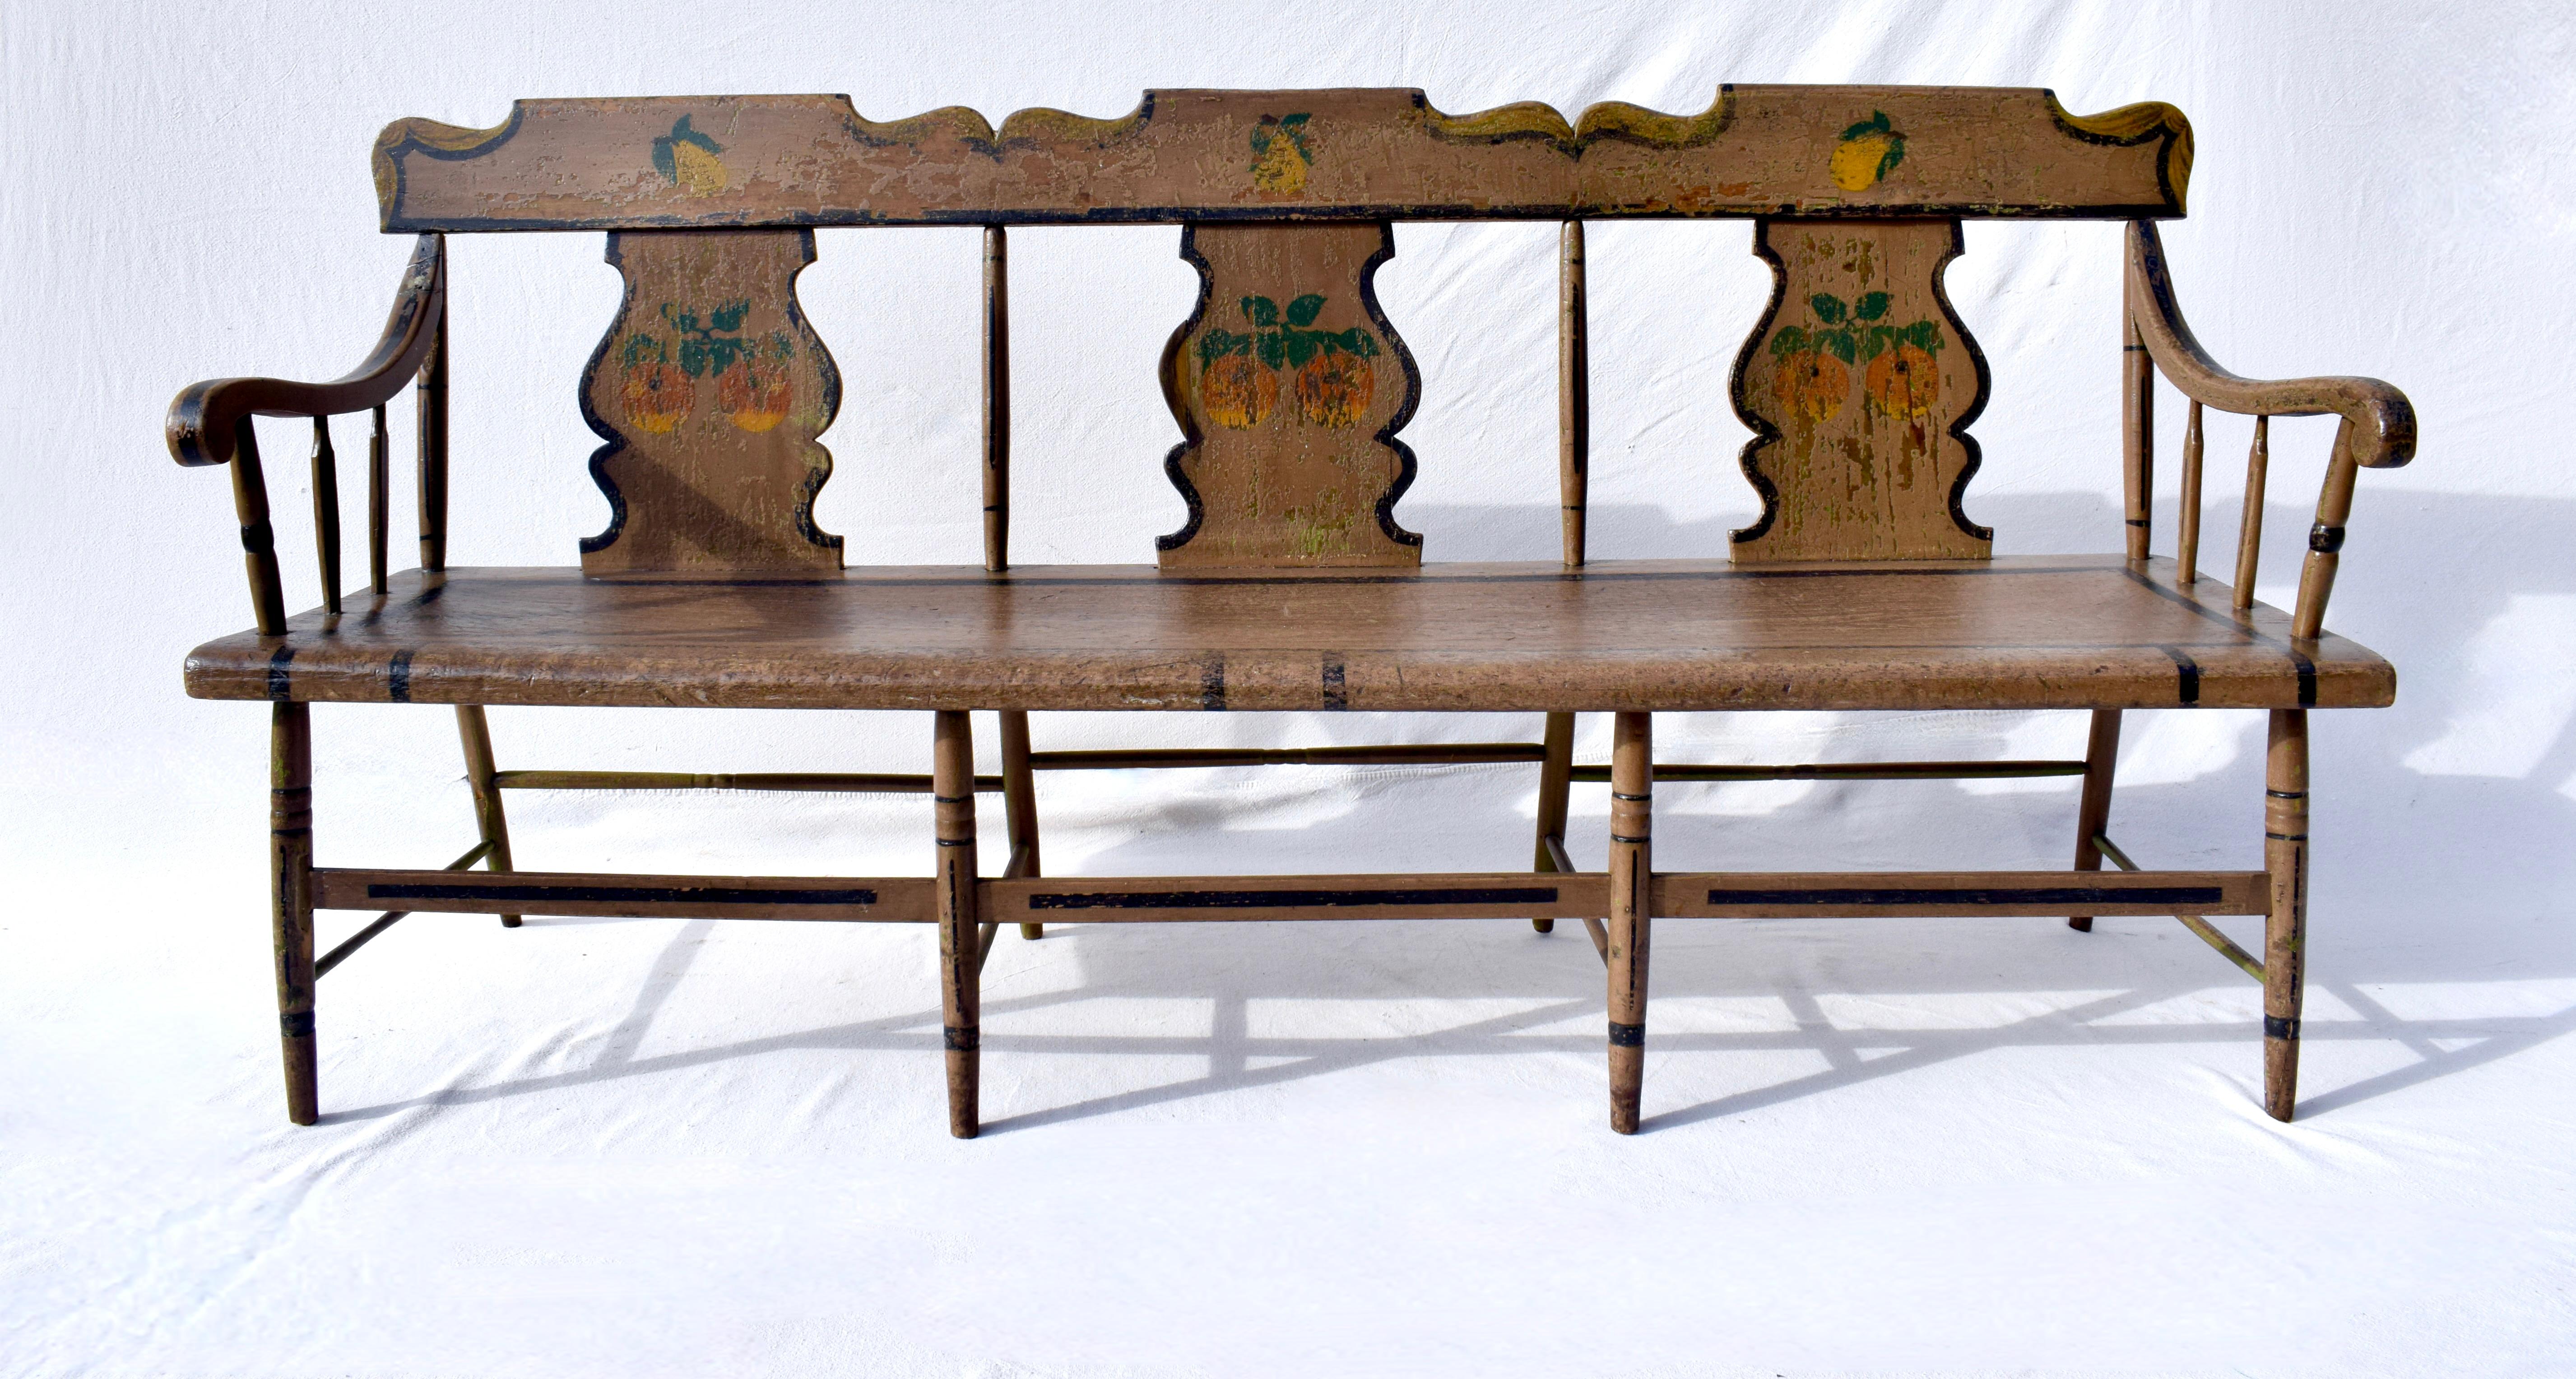 Pennsylvania single board plank seat bench settee, 19th c. of Pine & Poplar enhanced with new custom  cushion. The bench is professionally restored with re -glued joinery, sanded with careful attention to expose original hand painted details whilst